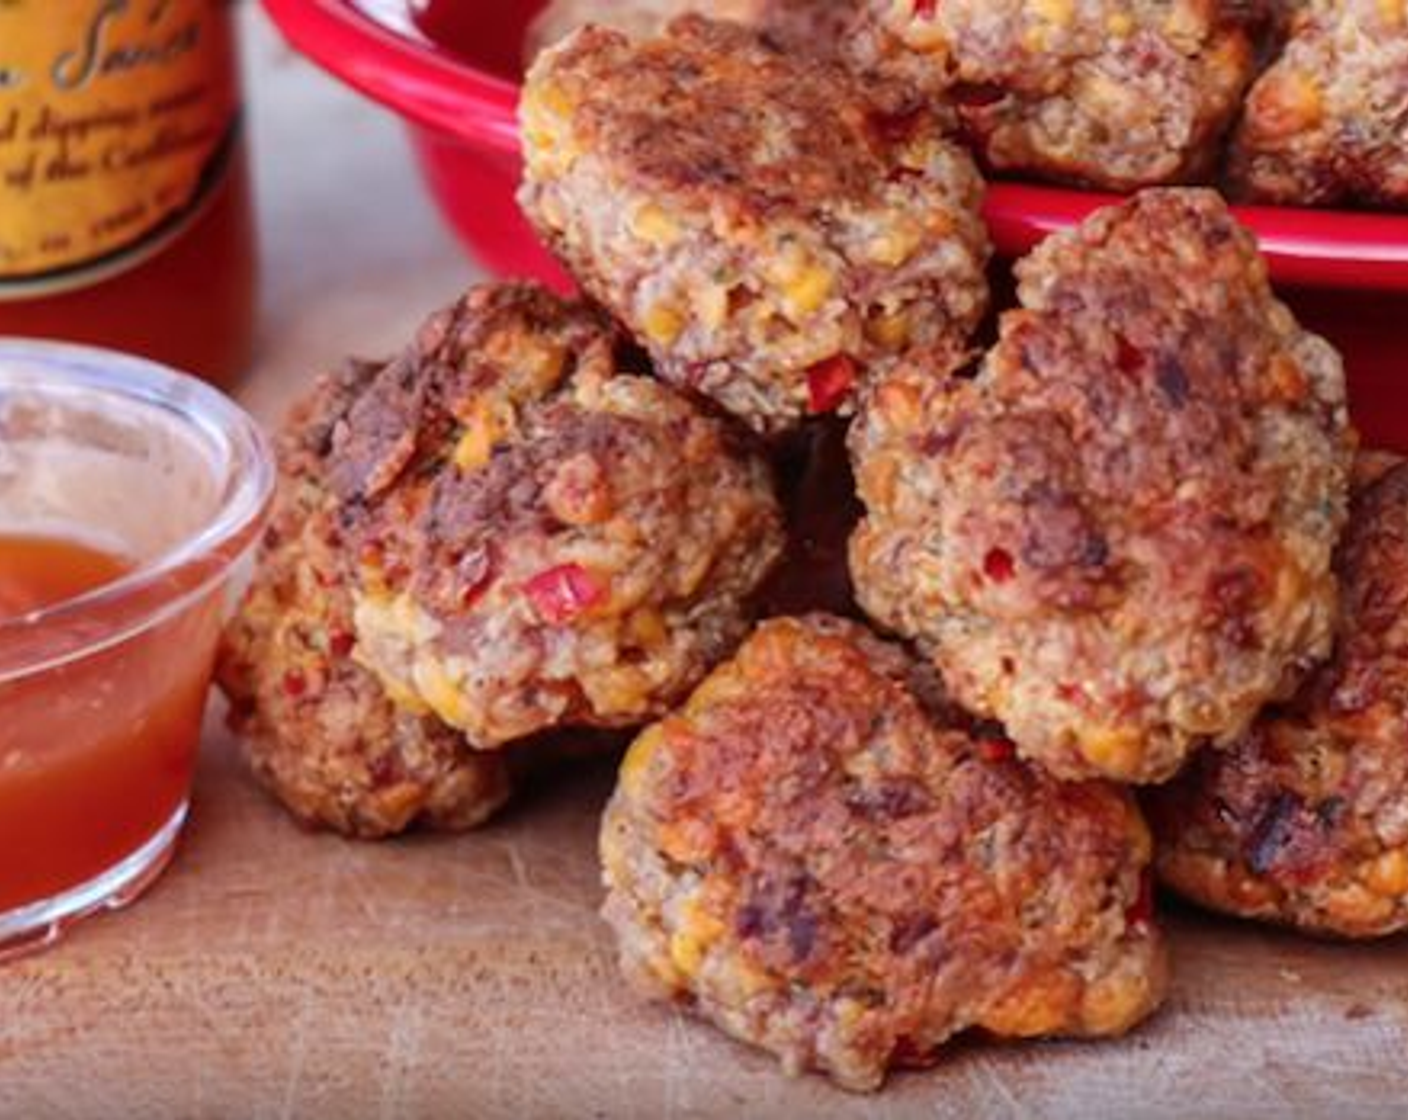 Spicy Sausage & Cheese Balls